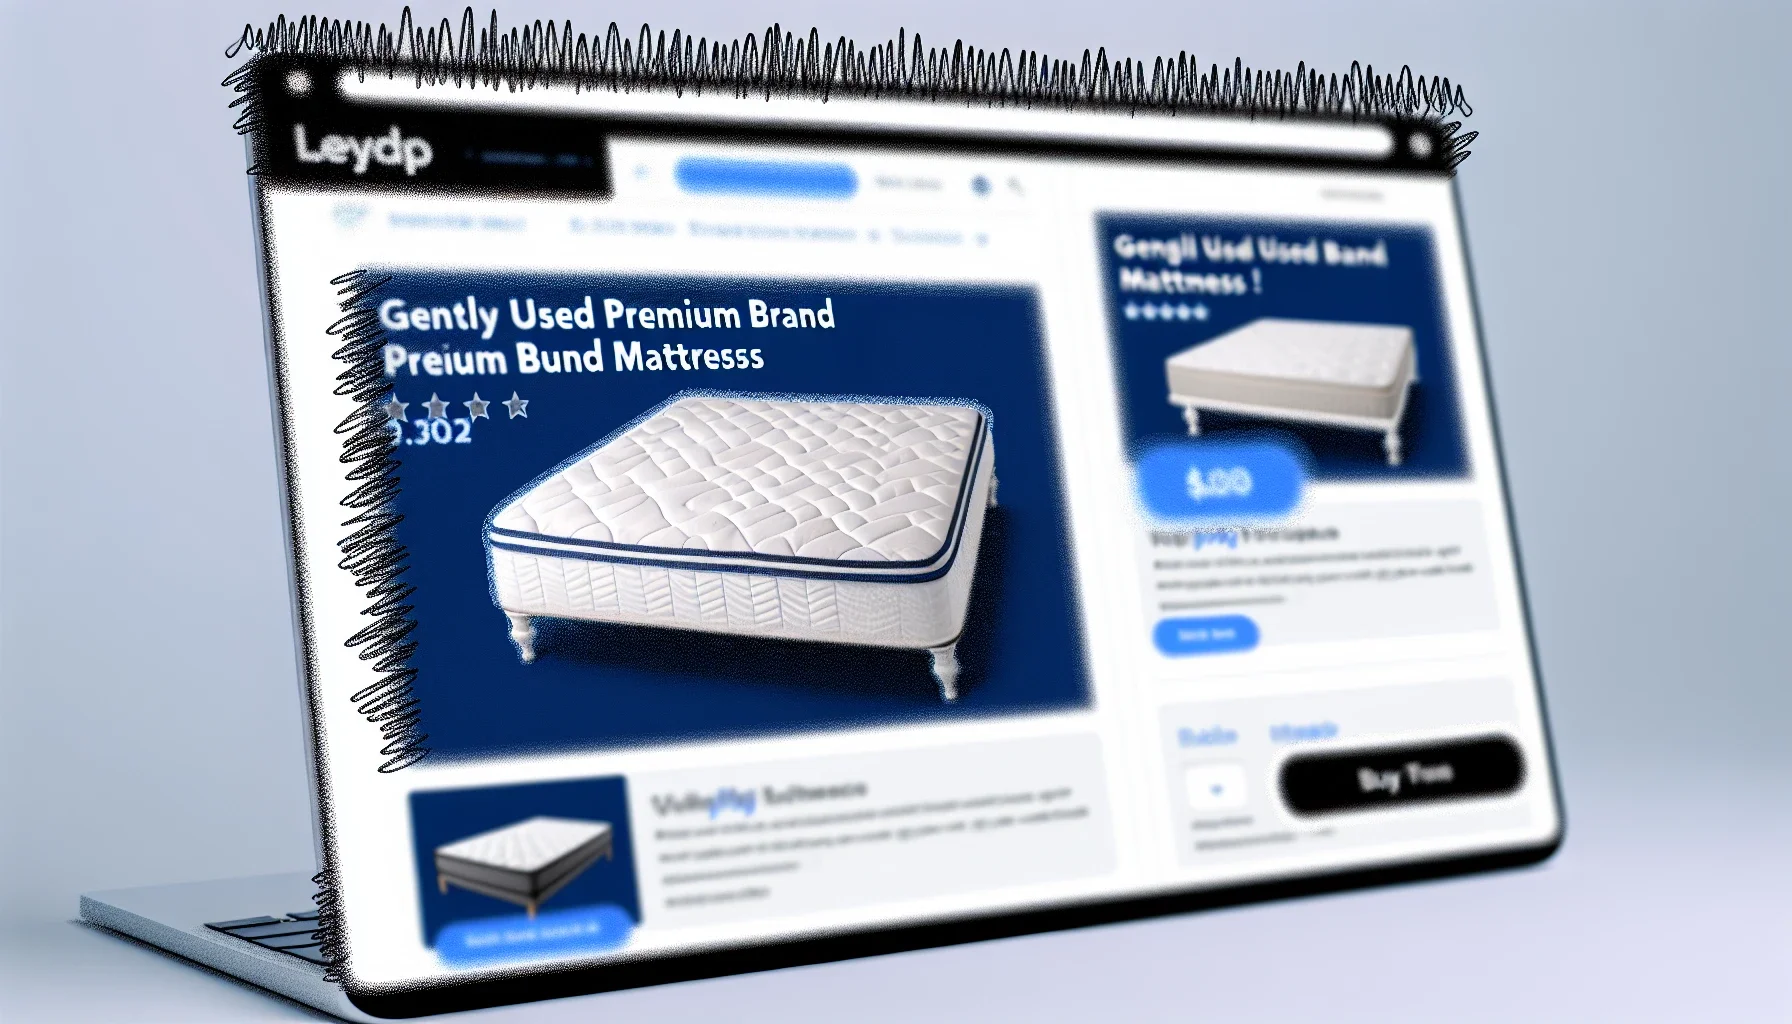 Online marketplace for used mattresses